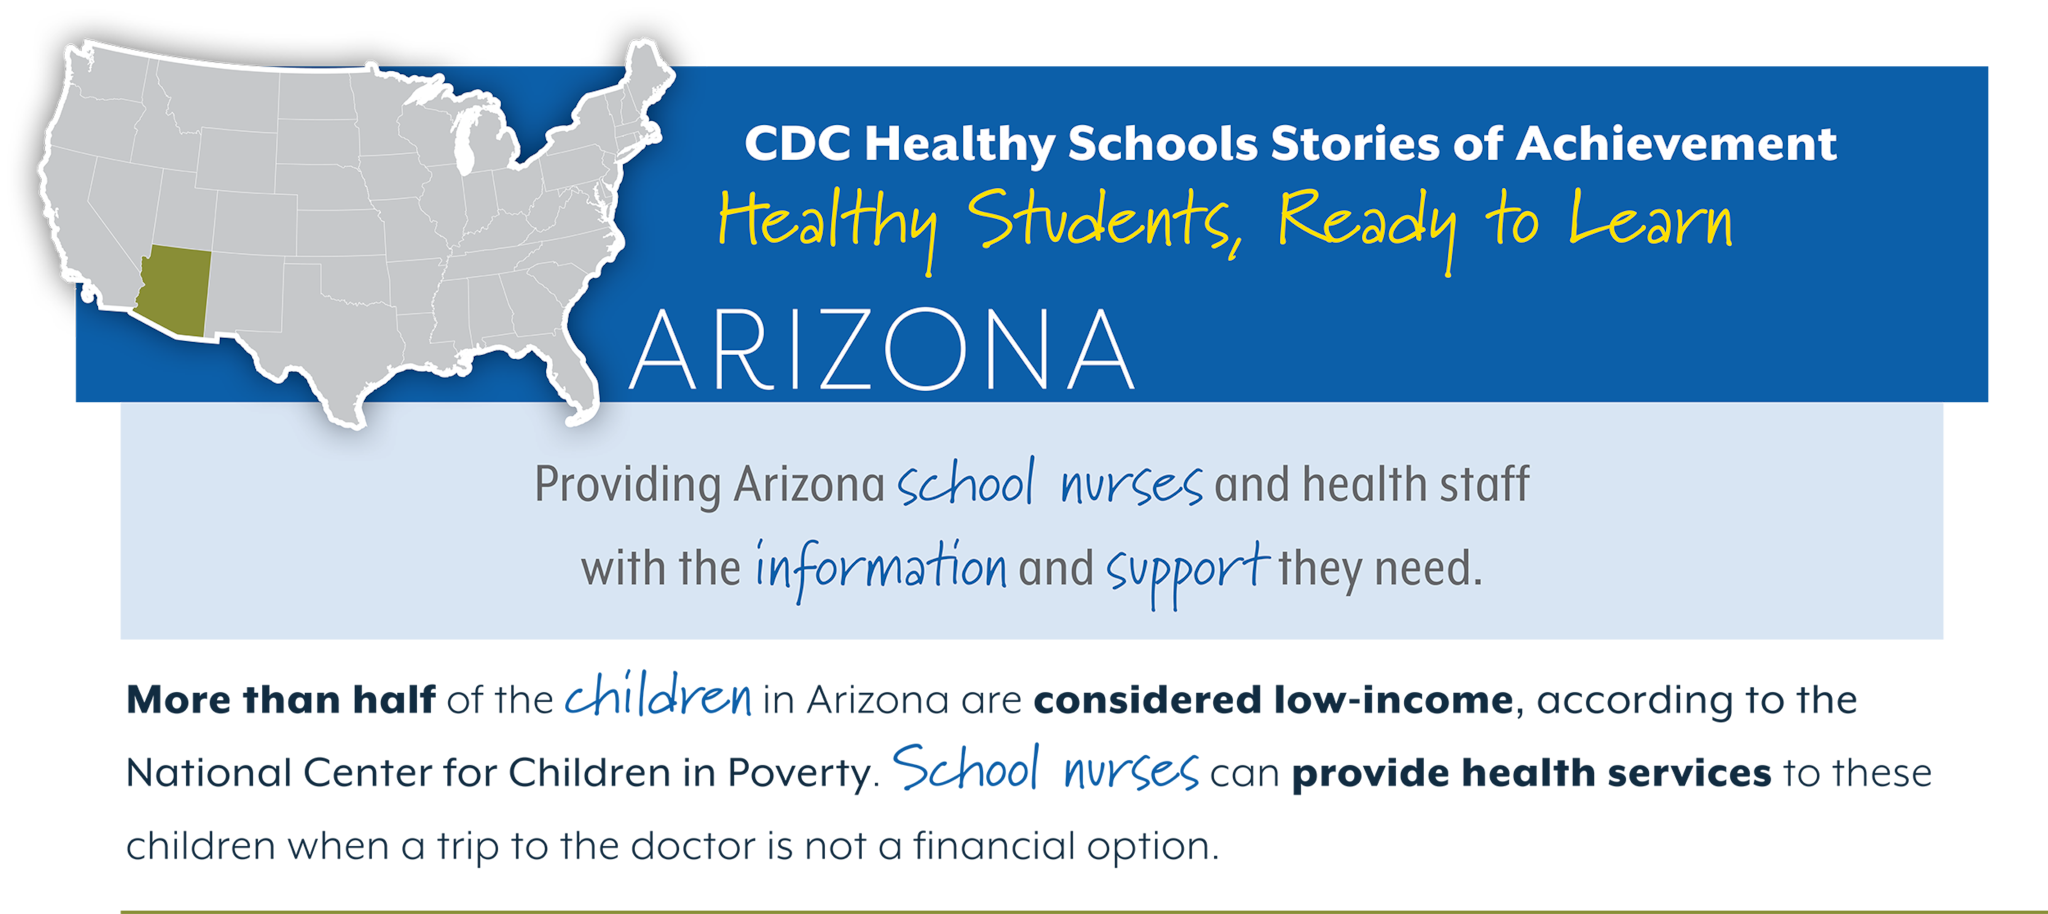 CDC Healthy Schools Stories of Achievement Healthy Students, Ready to Learn ARIZONA Providing Arizona school nurses and health staff  with the information and support they need. More than half of the children in Arizona are considered low-income, according to the  National Center for Children in Poverty. School nurses can provide health services to these  children when a trip to the doctor is not a financial option.